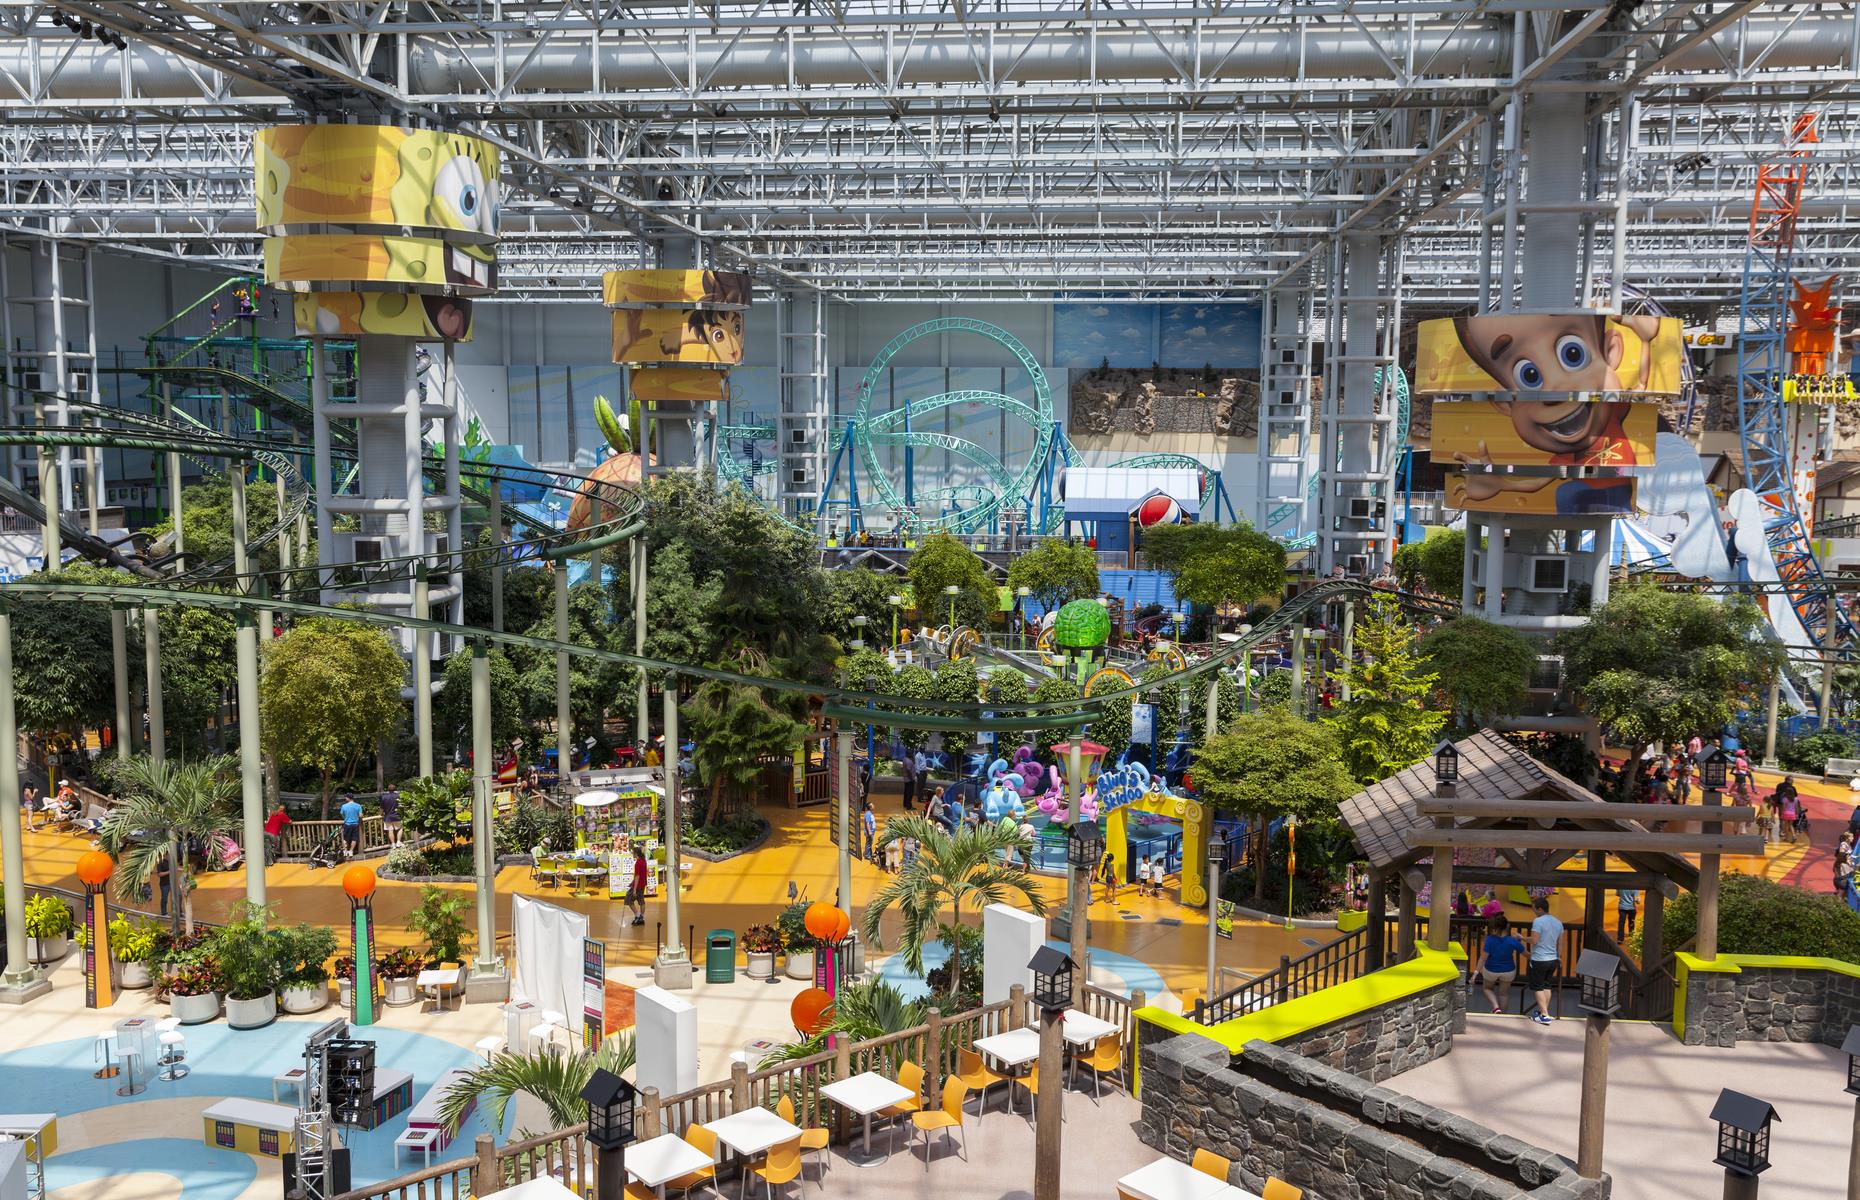 <p>This is no ordinary mall. As well as more than 520 stores, <a href="http://www.mallofamerica.com">this monstrous site</a> is home to one of the planet's largest indoor theme parks, Nickelodeon Universe, which boasts whimsical rides and attractions, and one of the world's longest indoor zip lines to boot. You'll also find the Sea Life Minnesota Aquarium and the Crayola Experience, a kid-pleasing attraction that includes the chance to see how the colorful crayons are made.</p>